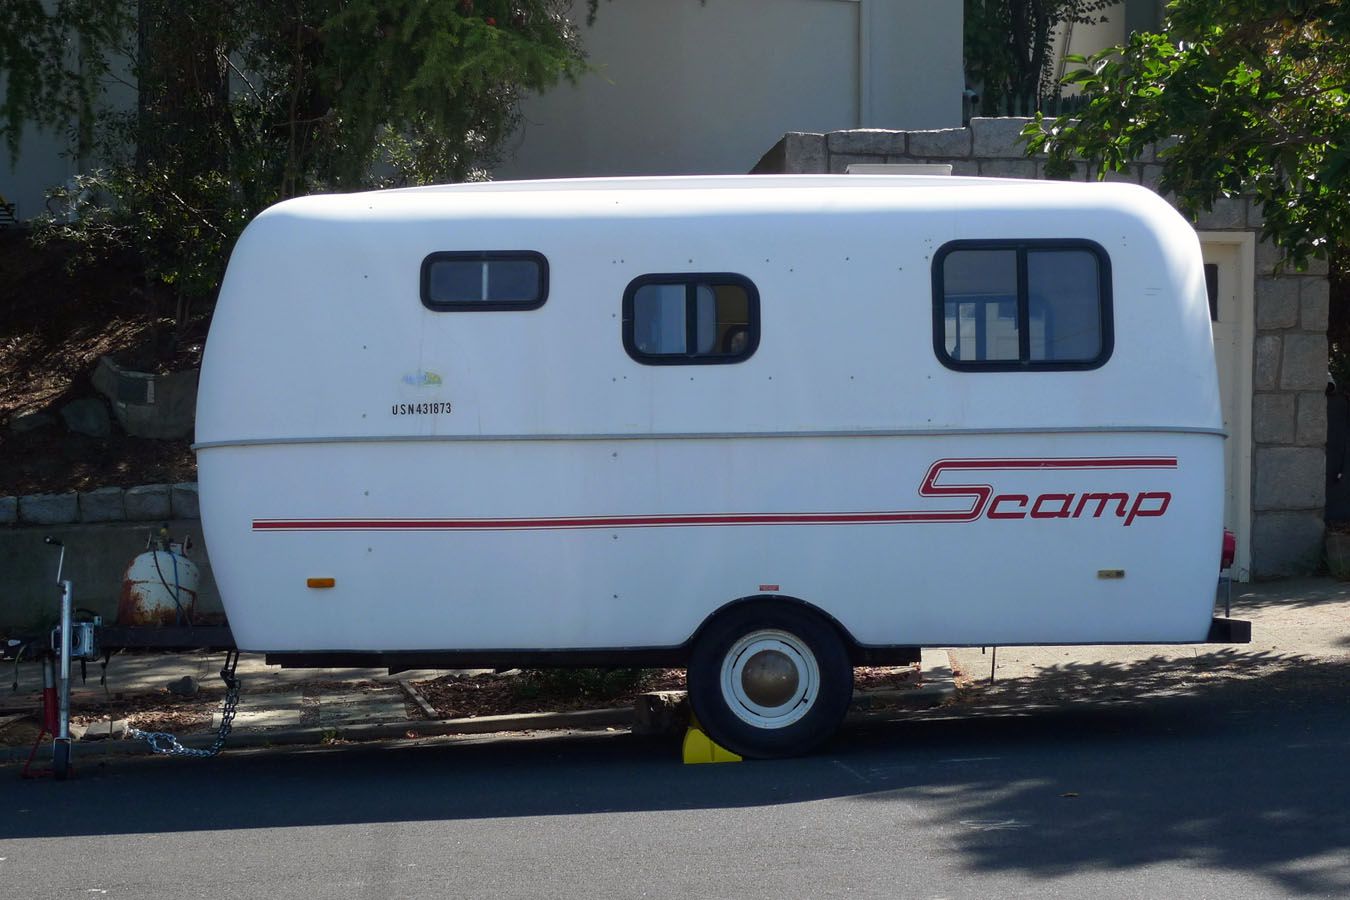 <p>Scamp has been making trailers since the 1970s, and is <a href="https://www.scamptrailers.com/">still going strong</a>. The camper's original aerodynamic profile remains on the modern standard and deluxe models, available in 13- and 16-foot trailer versions, as well as a 19-foot fifth-wheel version. This latter option comes with oak or birch hardwoods, a larger bath area, more storage, and space to accommodate a larger refrigerator. </p>